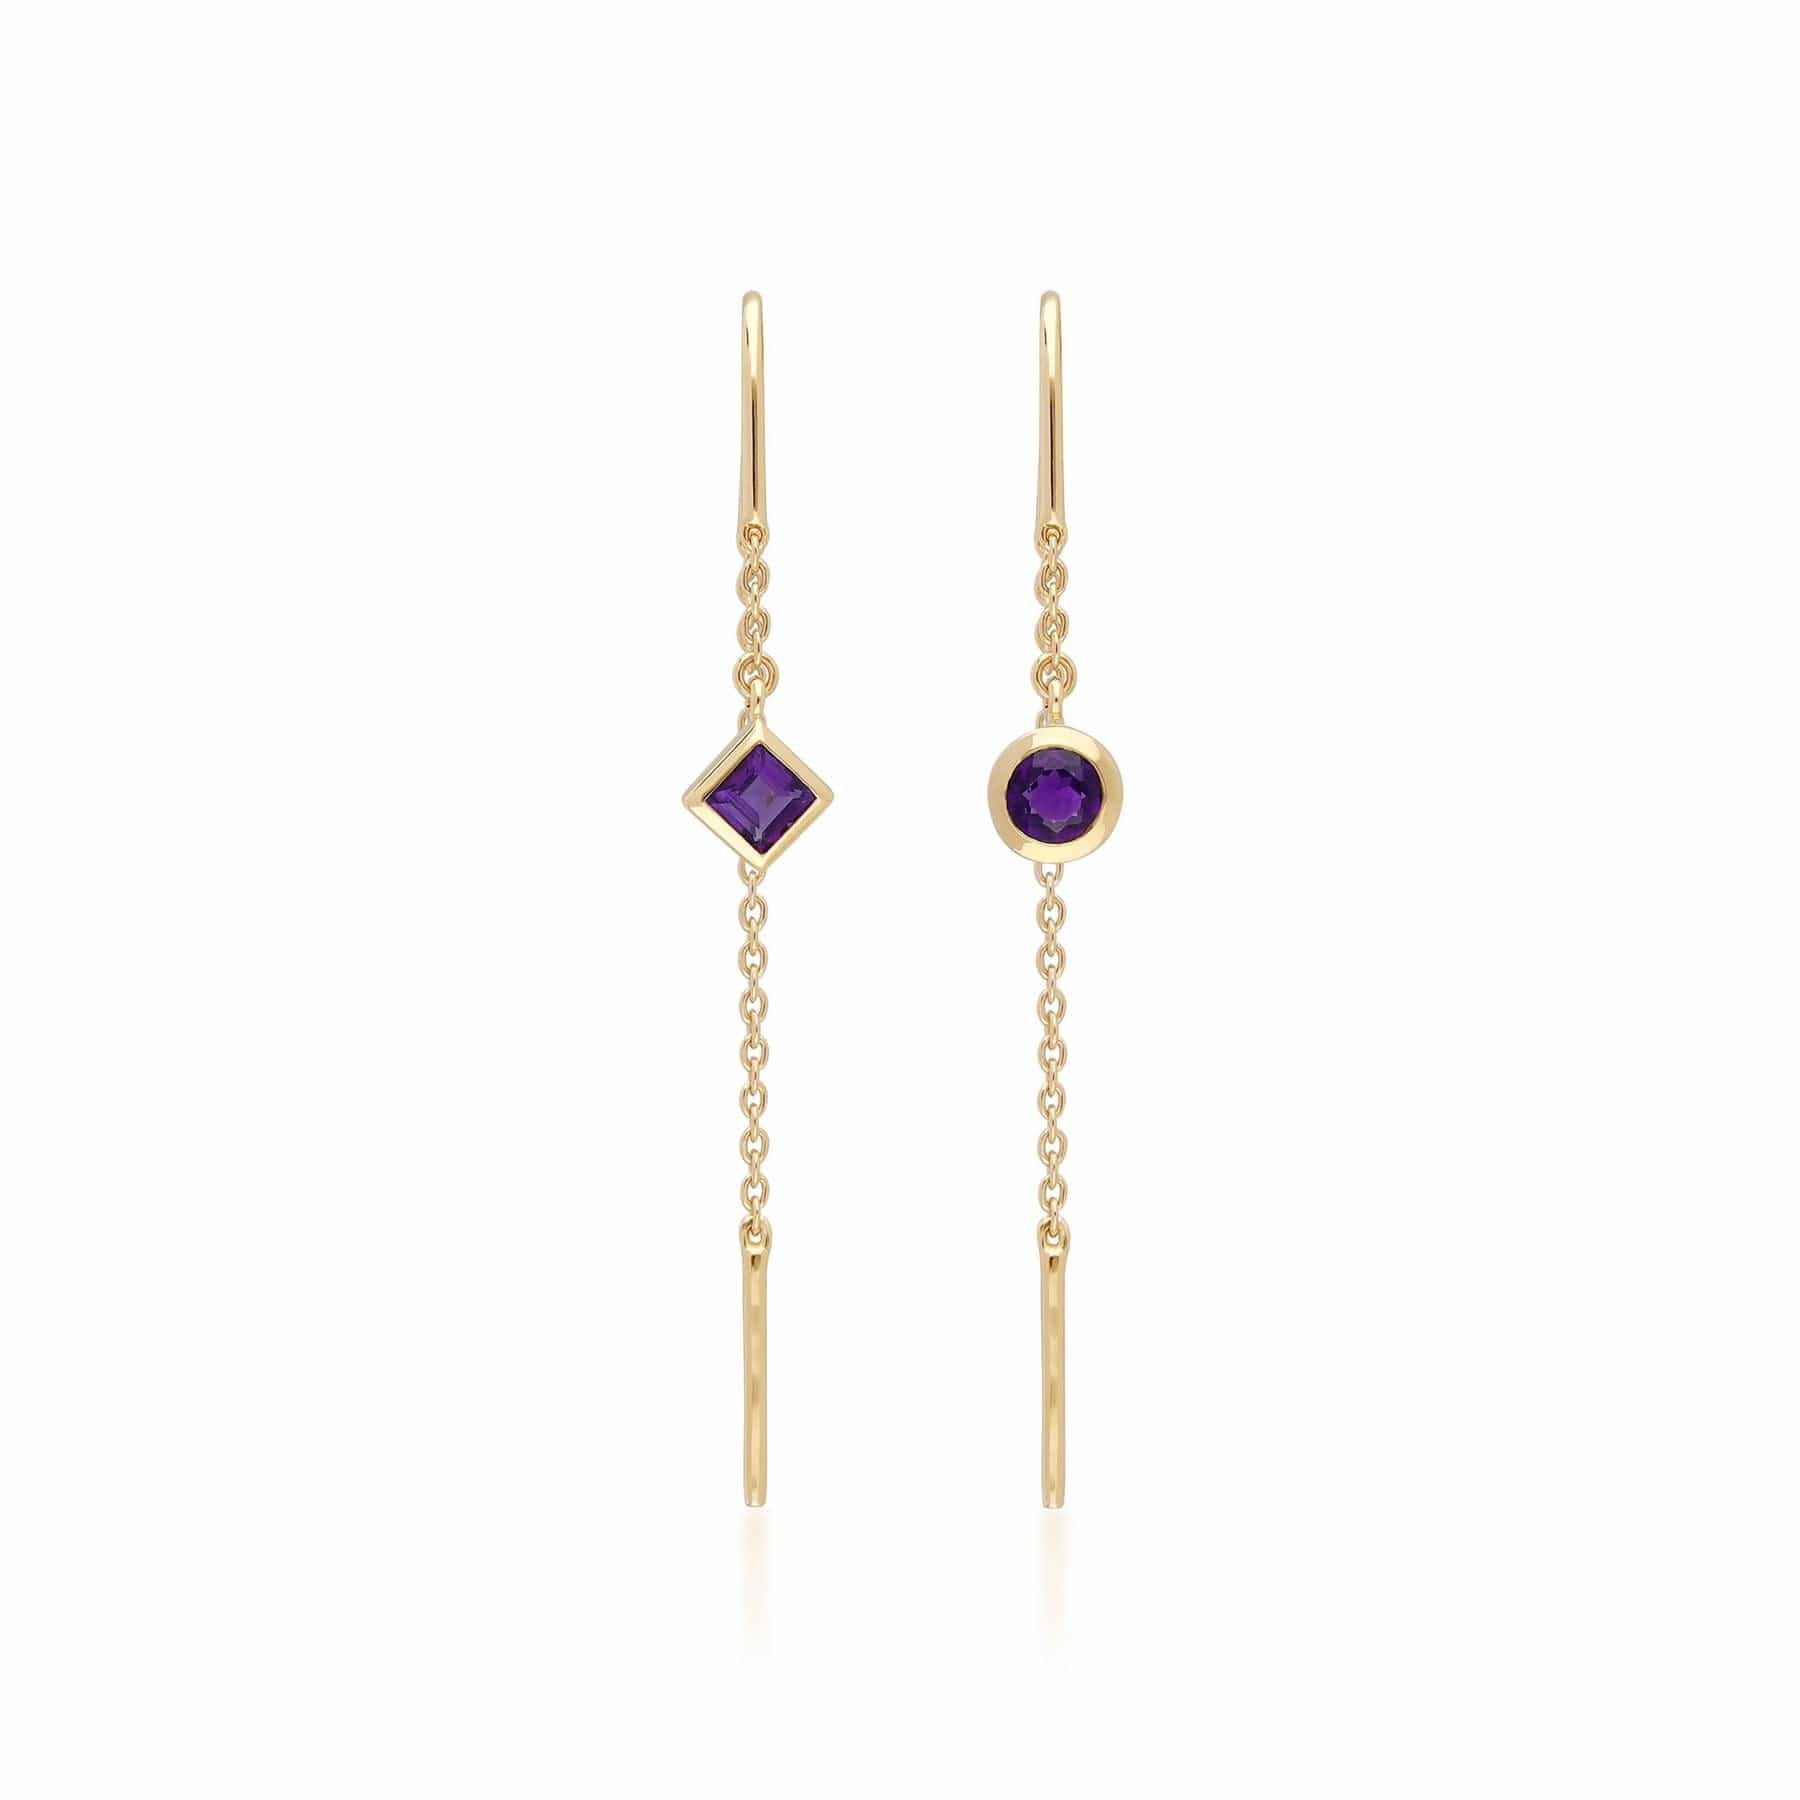 135E1636019 Micro Statement Amethyst Threader Earrings in 9ct Yellow Gold 4